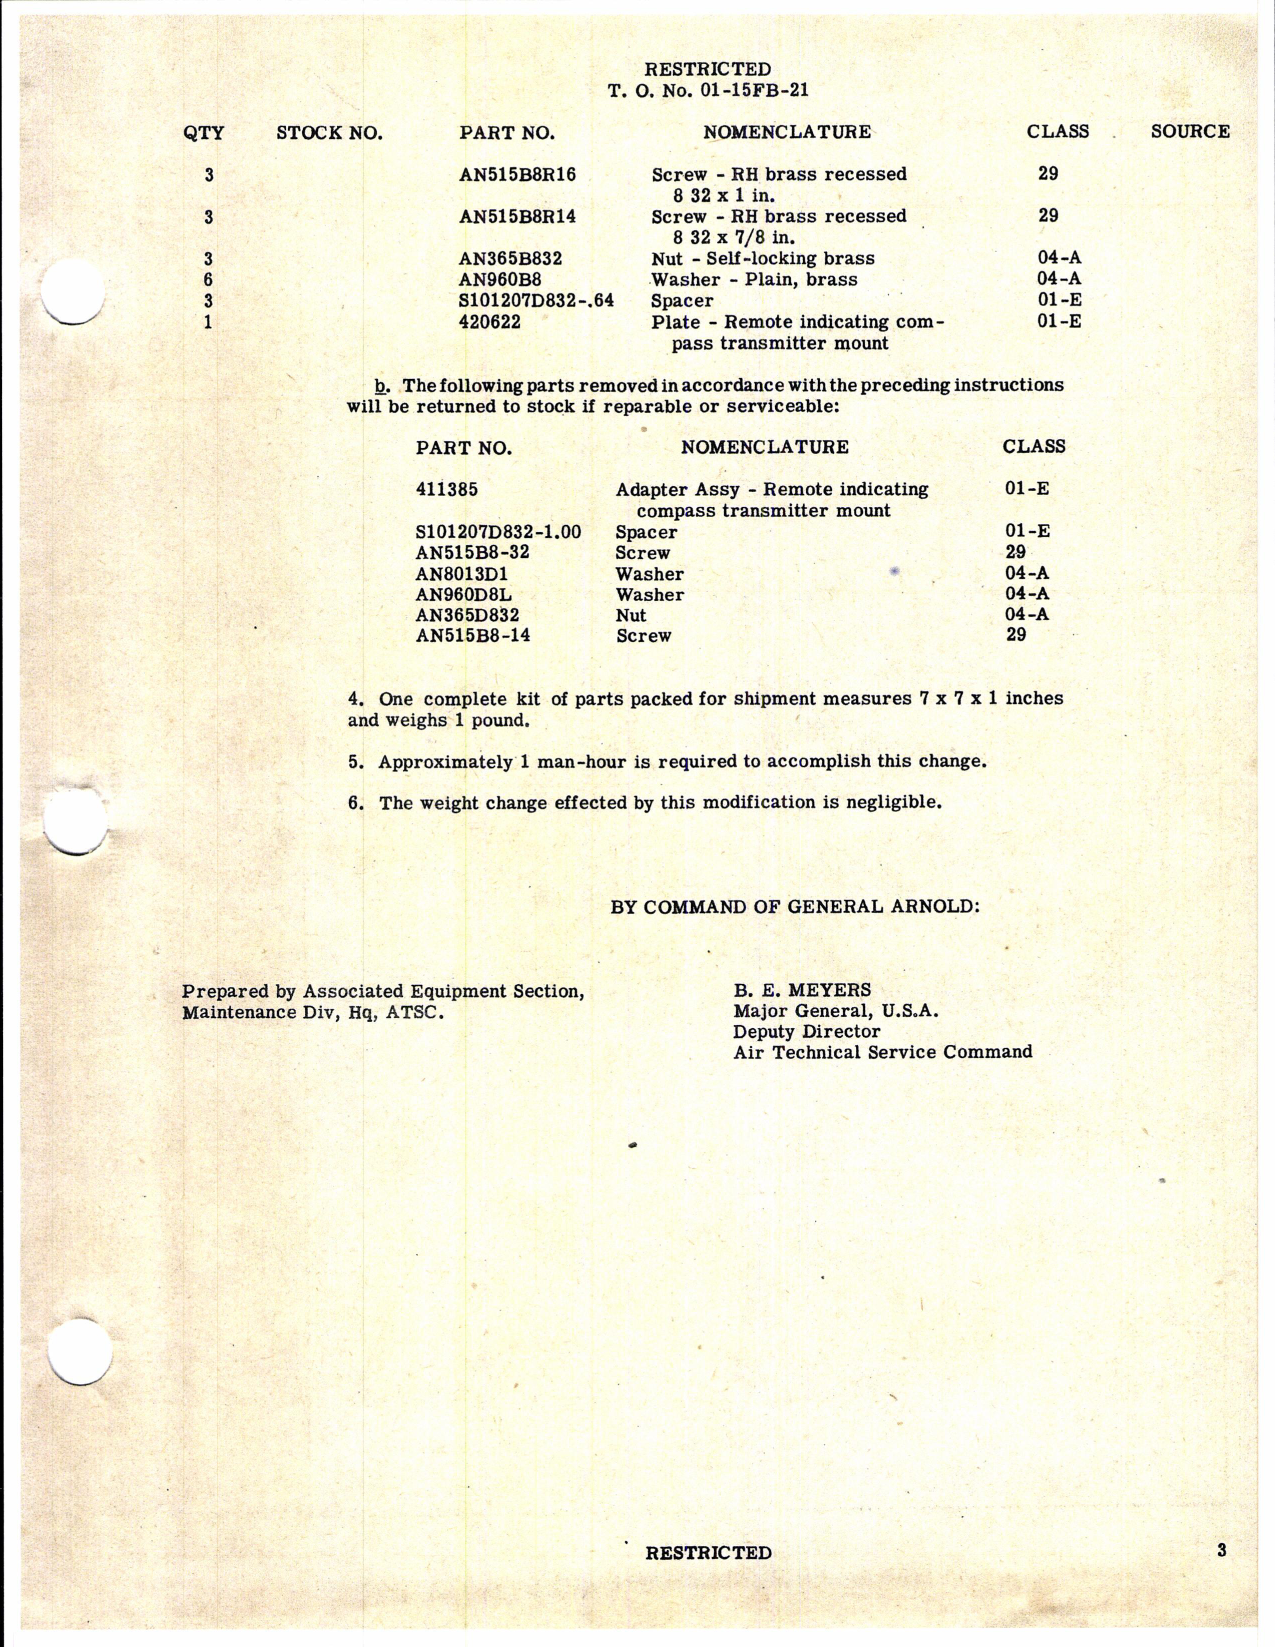 Sample page 3 from AirCorps Library document: Modification of Remote Indicating Compass Transmitter for P-61A and P-61B